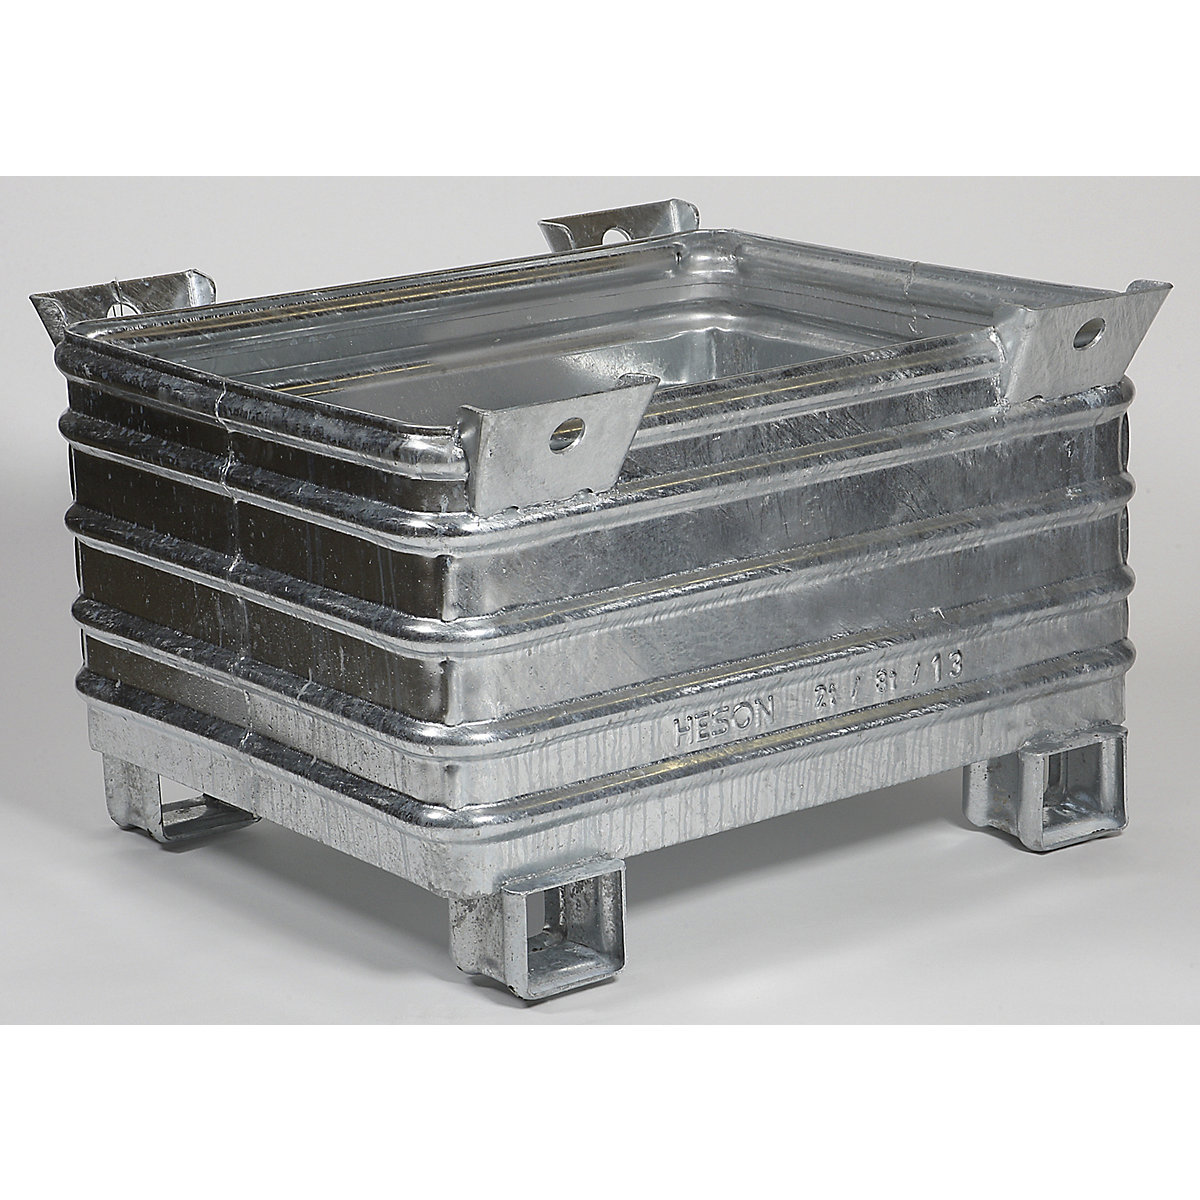 Heavy duty box pallet – Heson, WxL 800 x 1000 mm, with U-shaped feet, hot dip galvanised, 1+ items-4